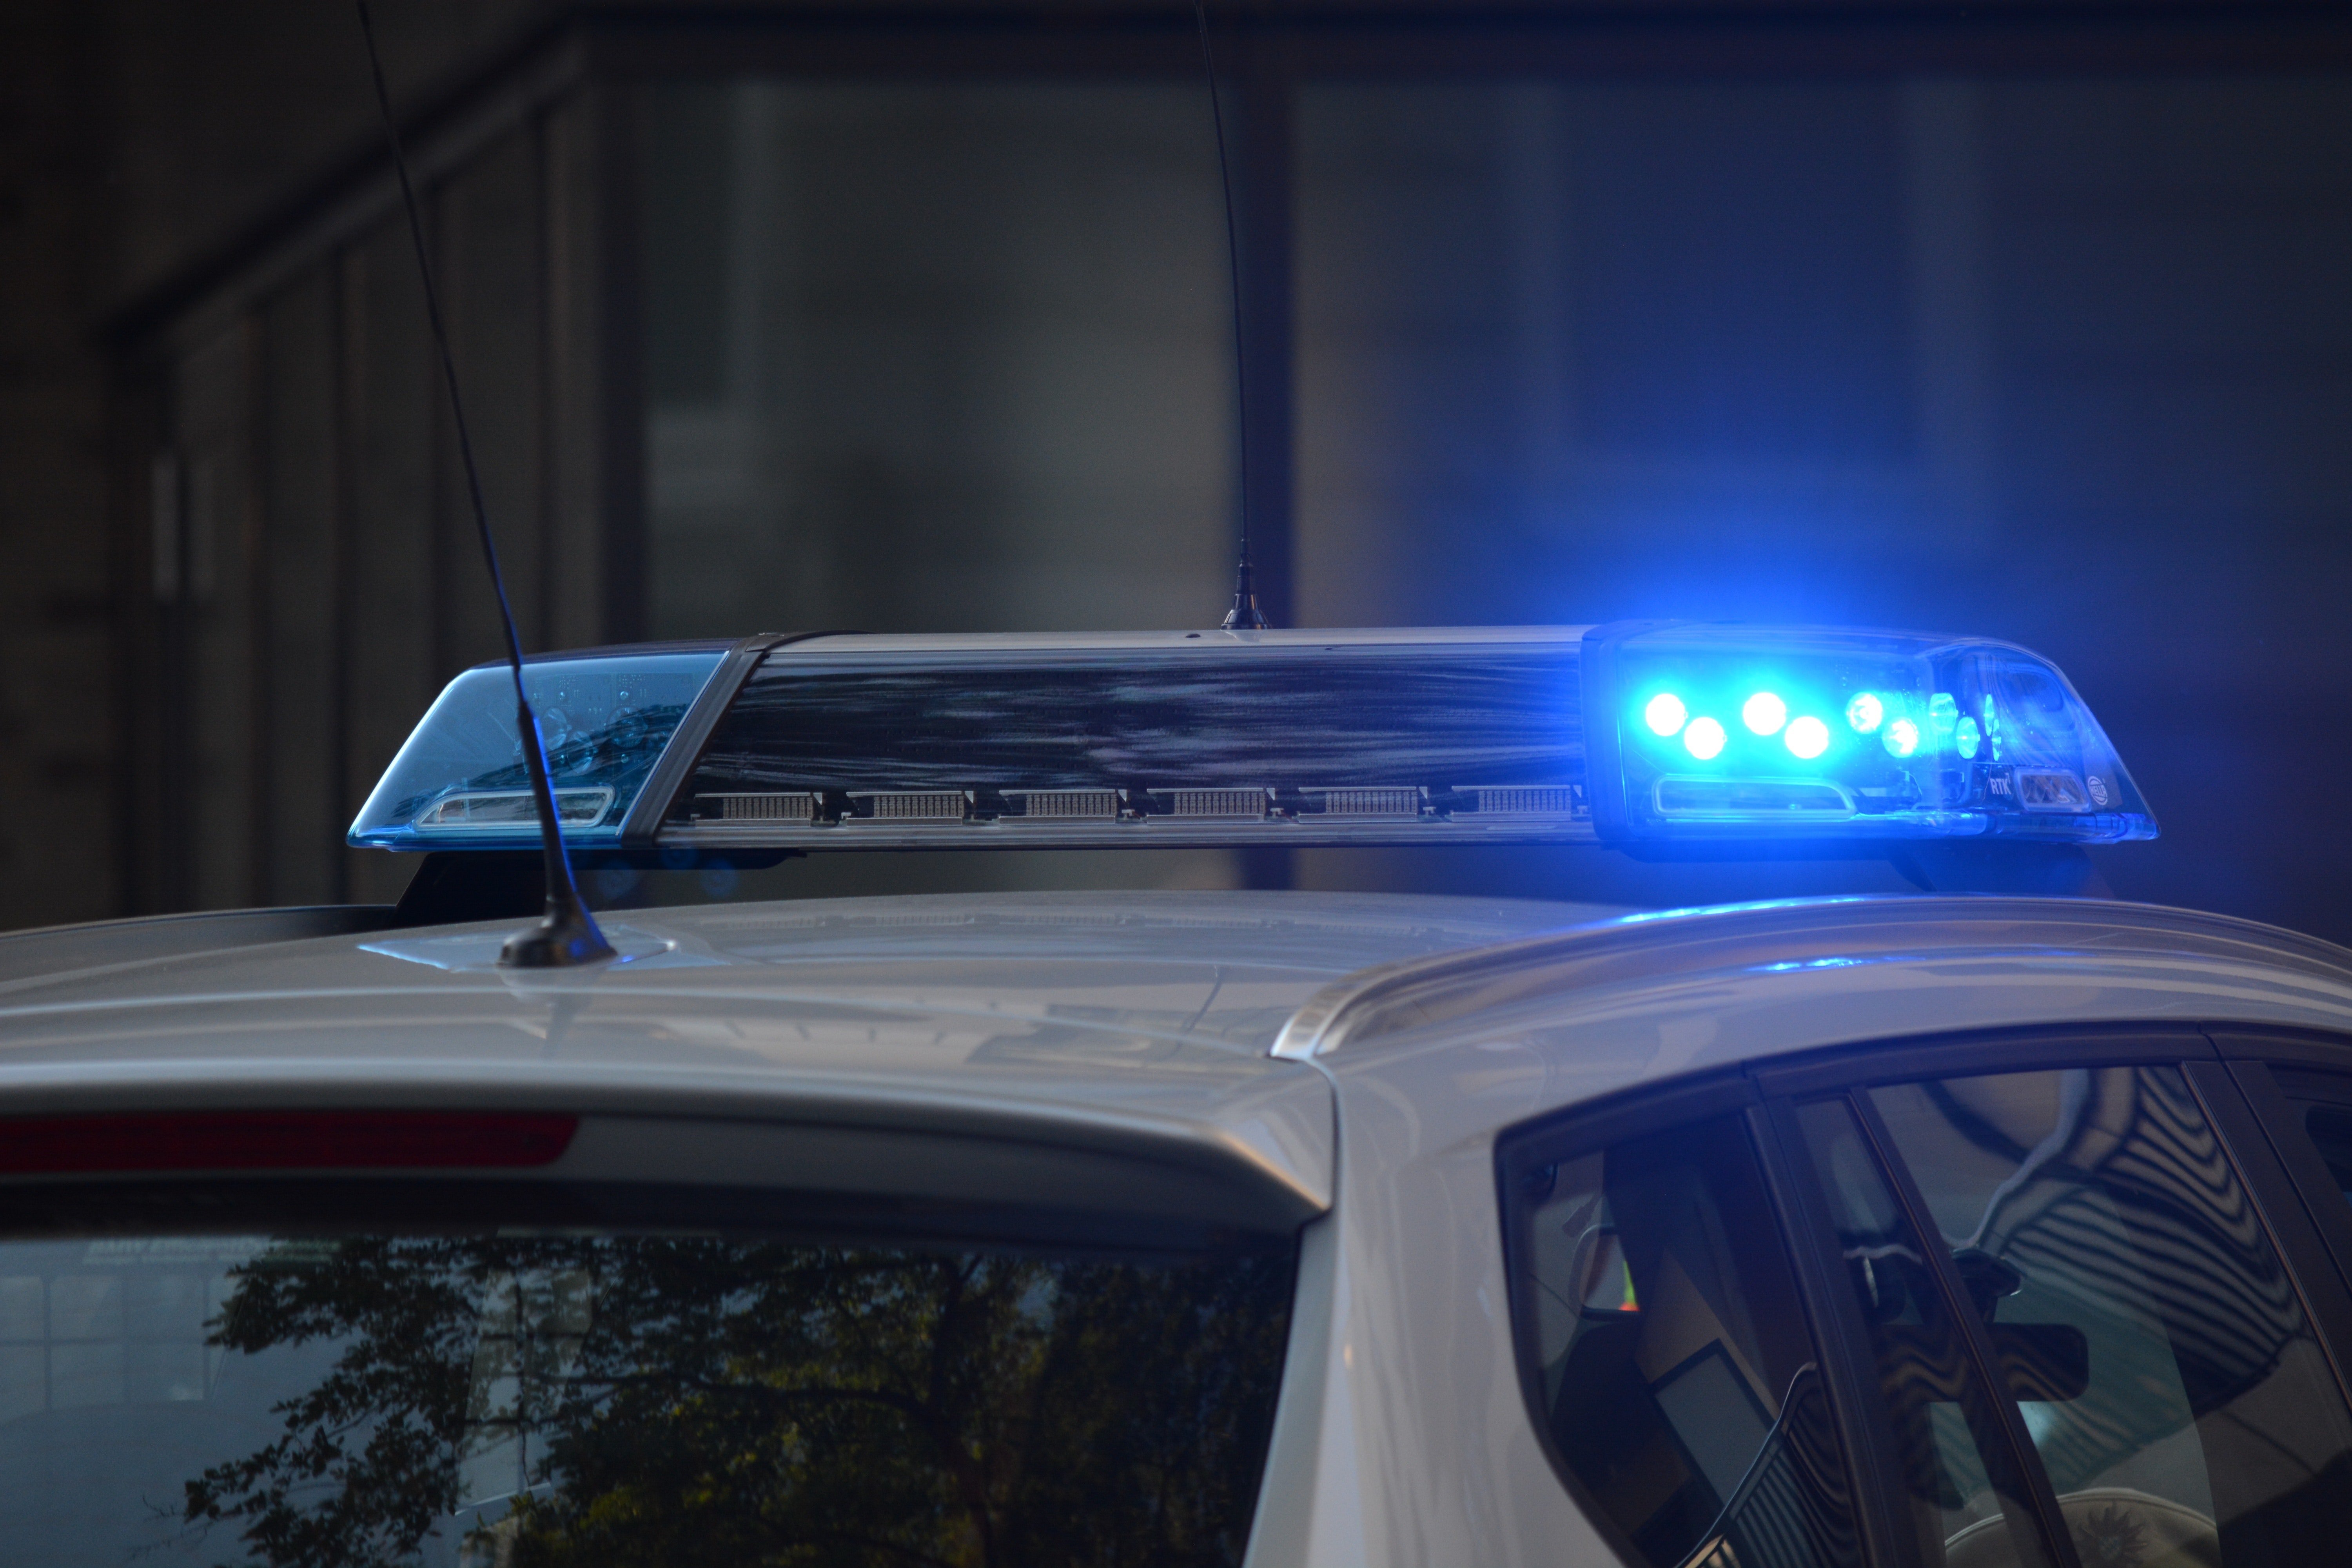 Blue police sirens on top of a vehicle. | Source: Pexels/ Pixabay